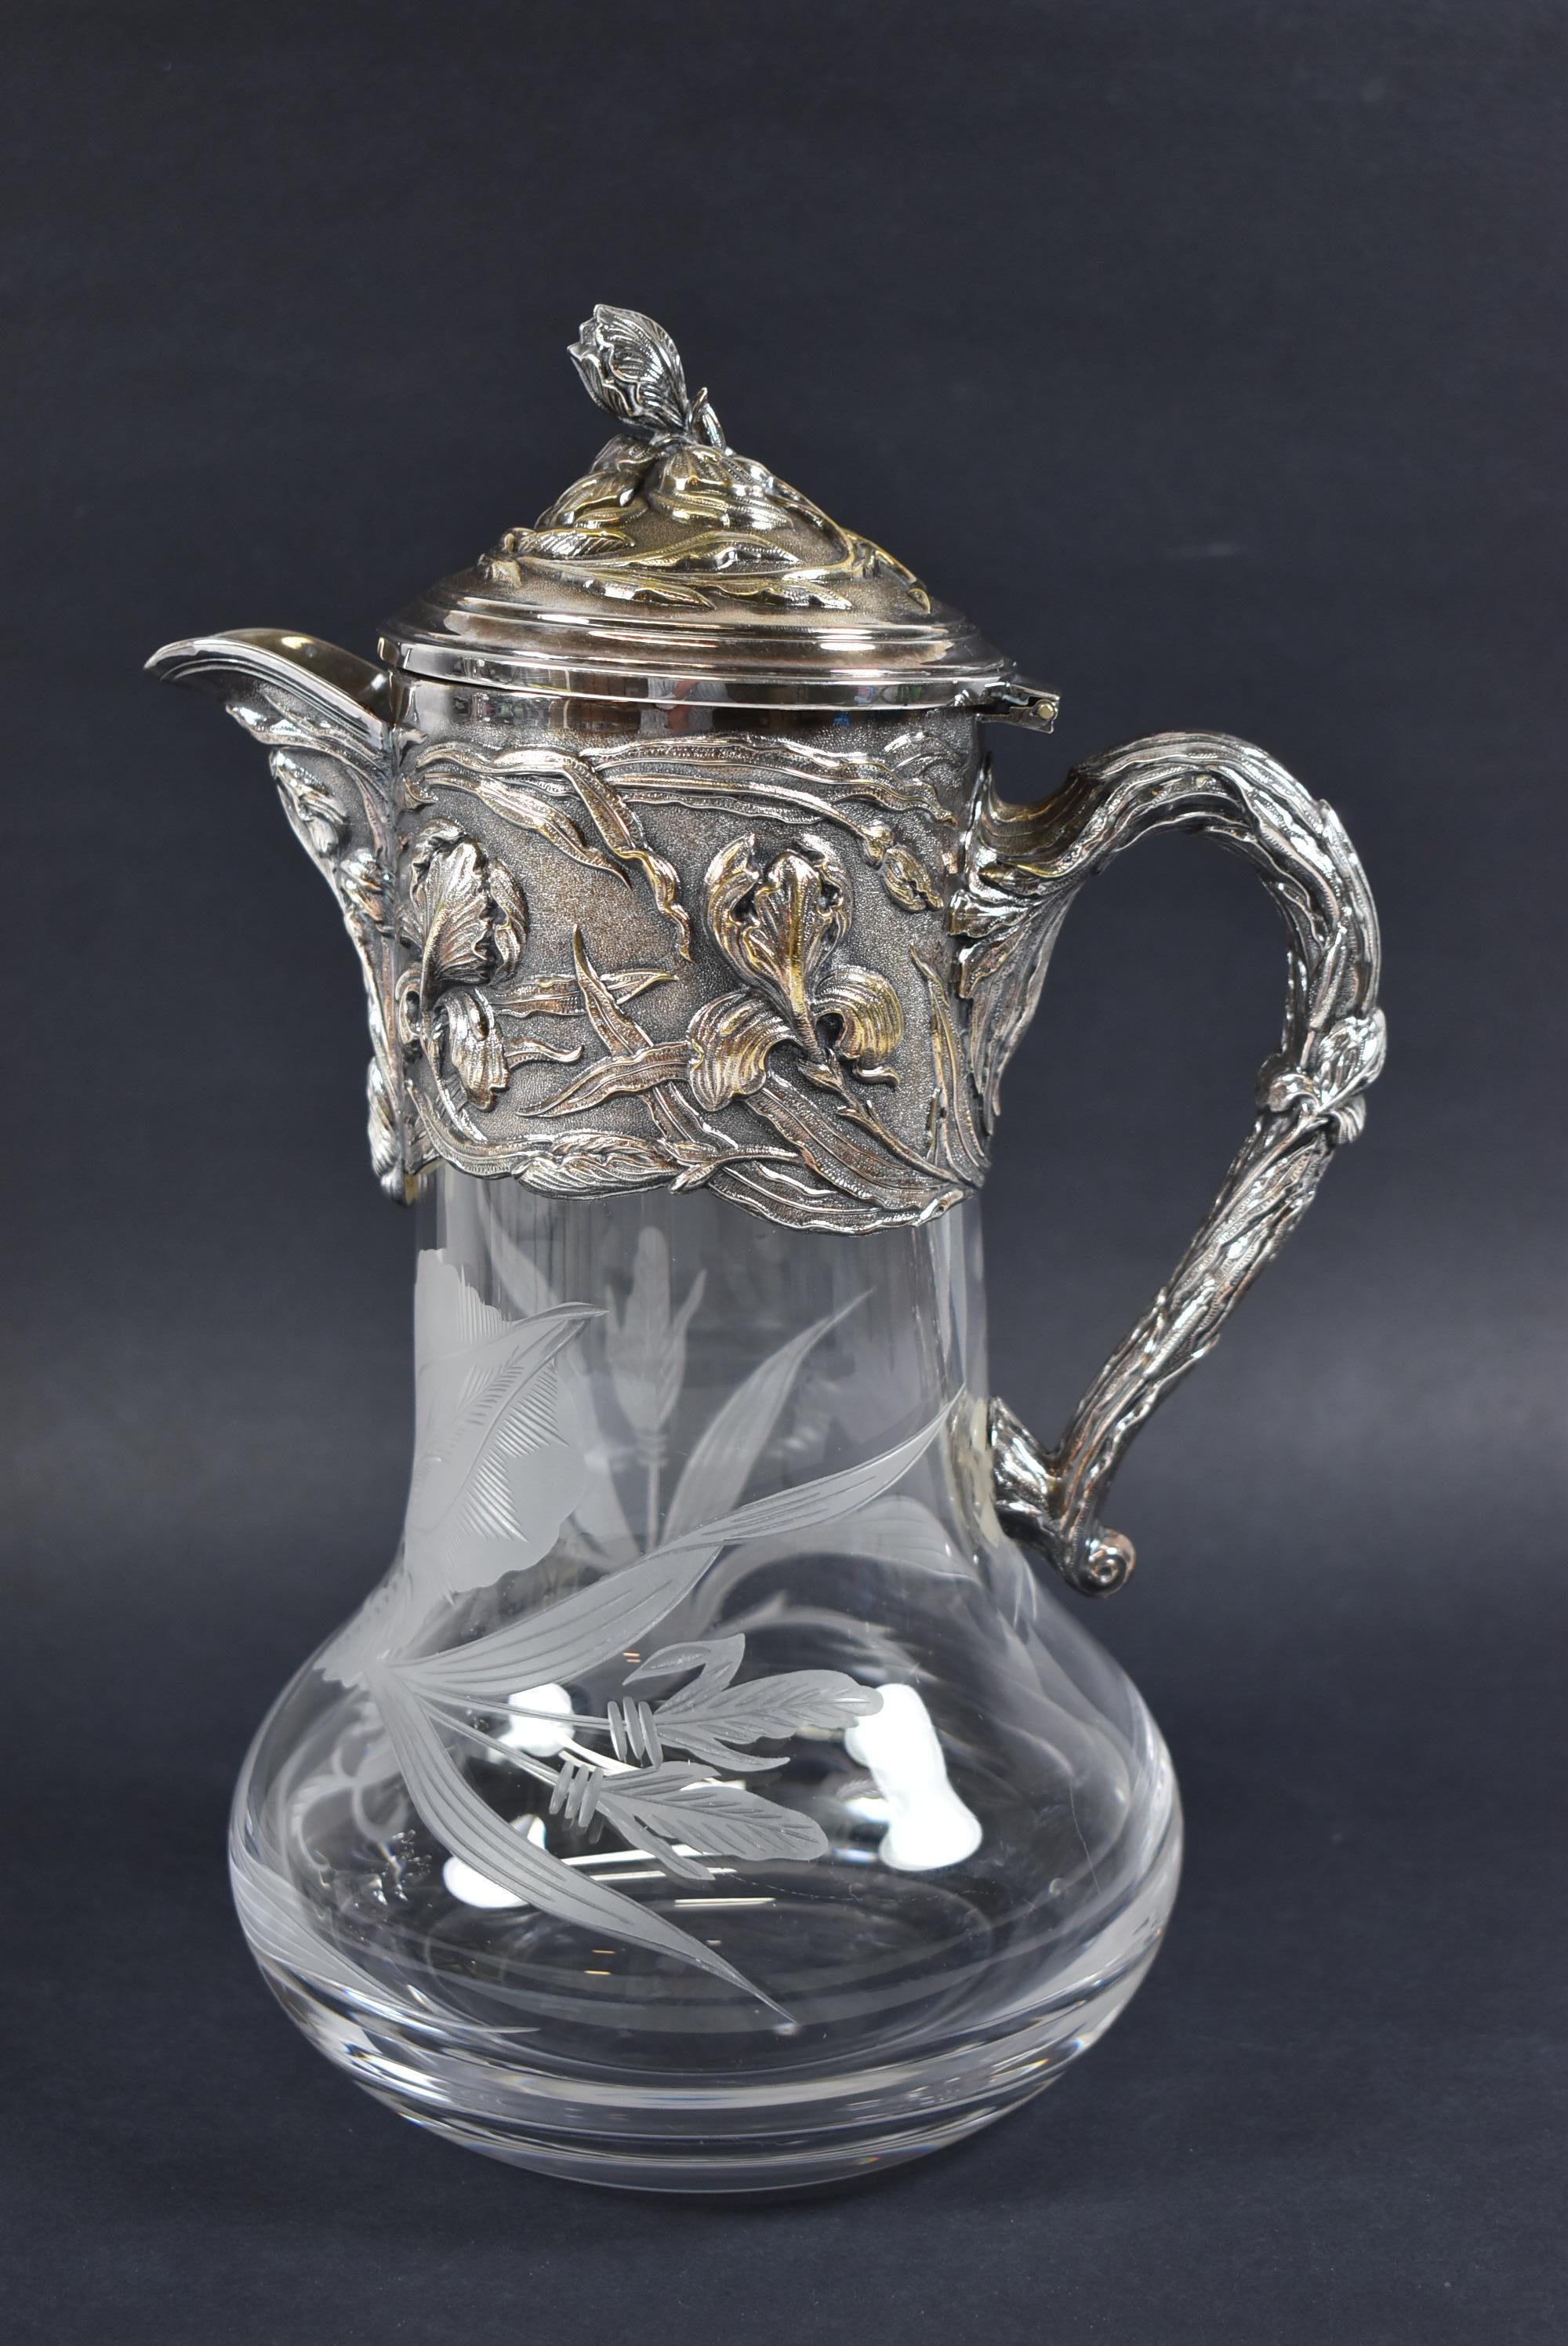 Antique Art Nouveau Topazio silver plate and etched glass carafe or pitcher or claret. Iris designs in the glass and silver plate. Very good condition. Dimensions: 5